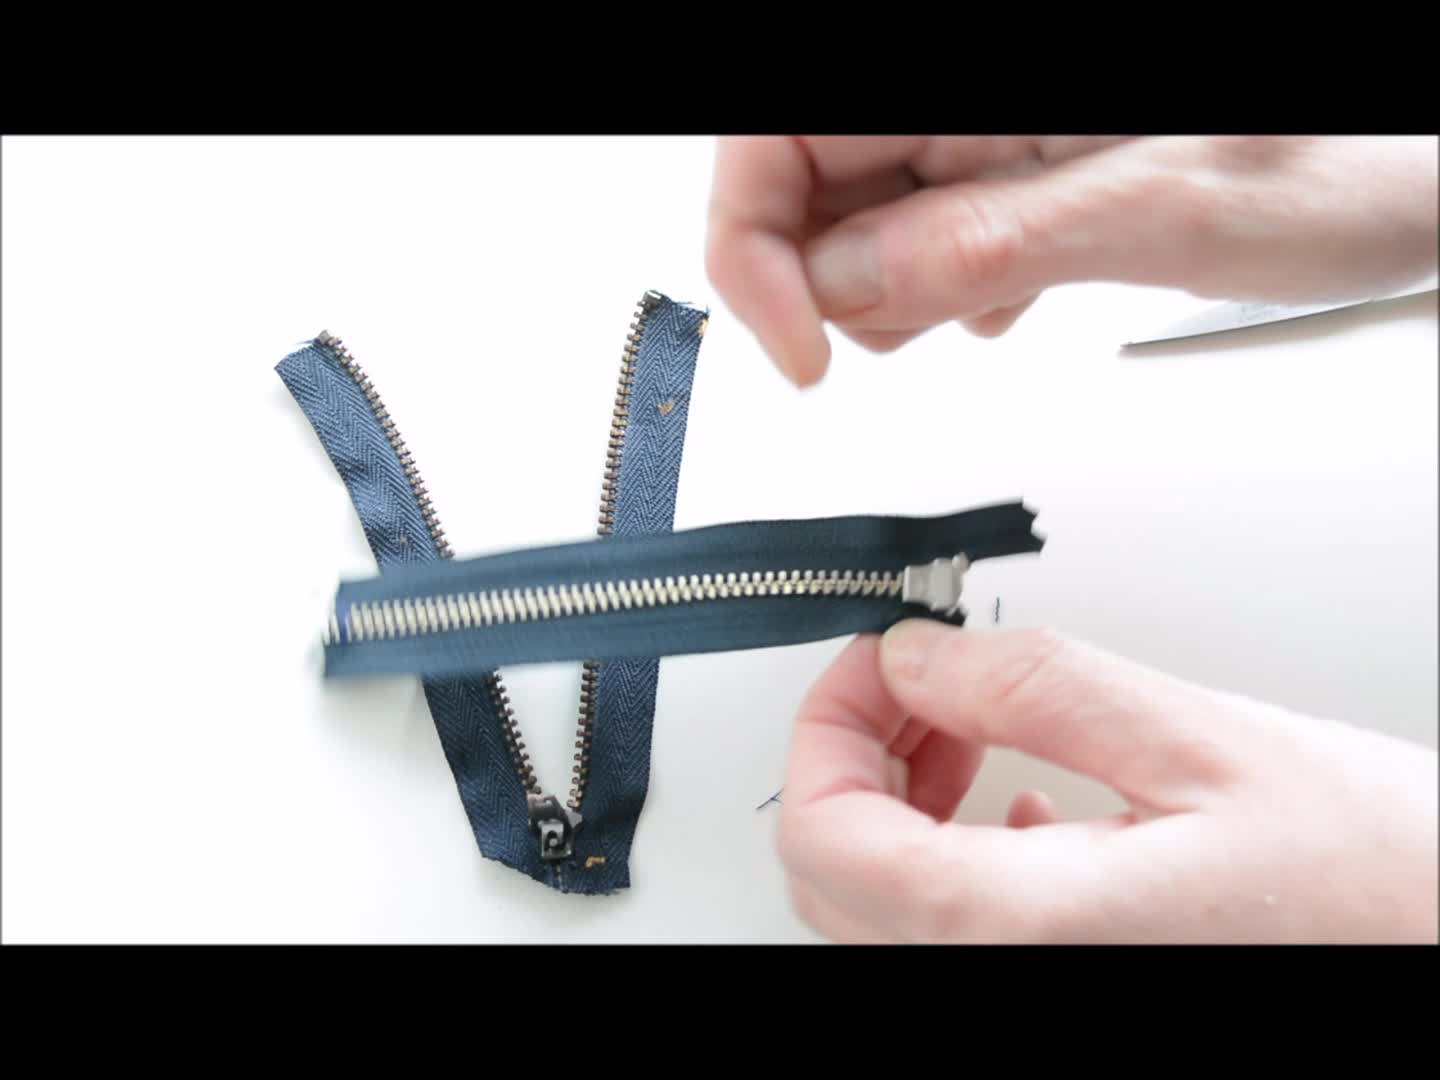 How to replace backpack zipper · VickyMyersCreations